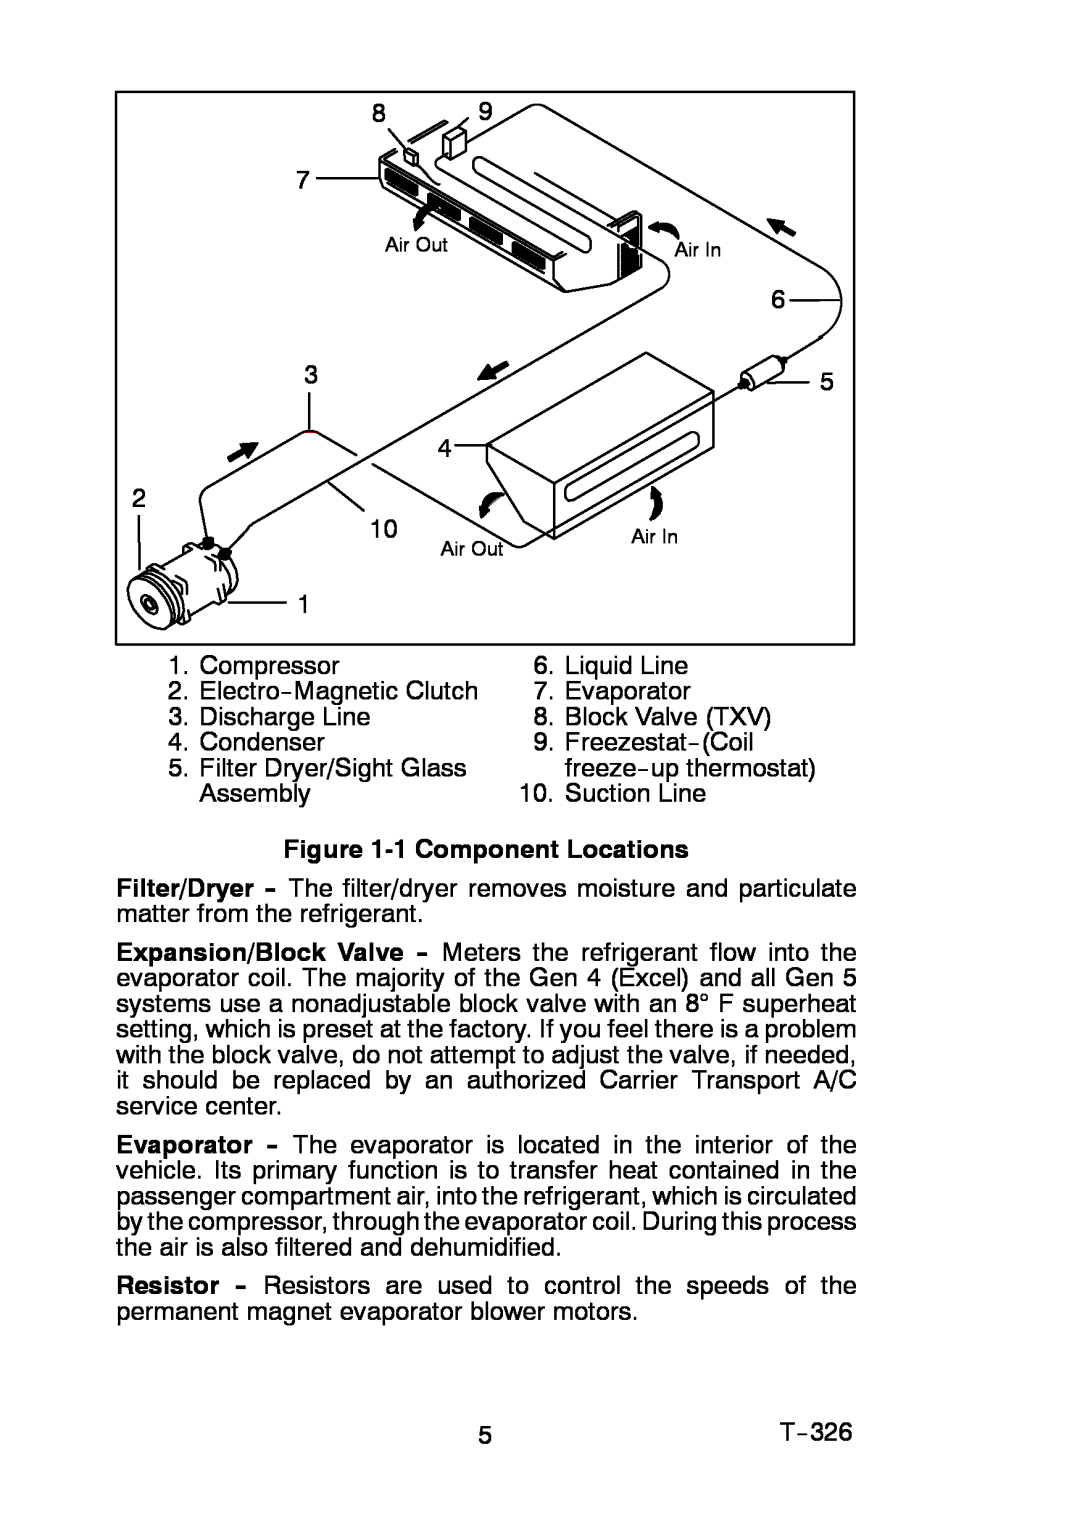 Carrier T-326 manual 1Component Locations 